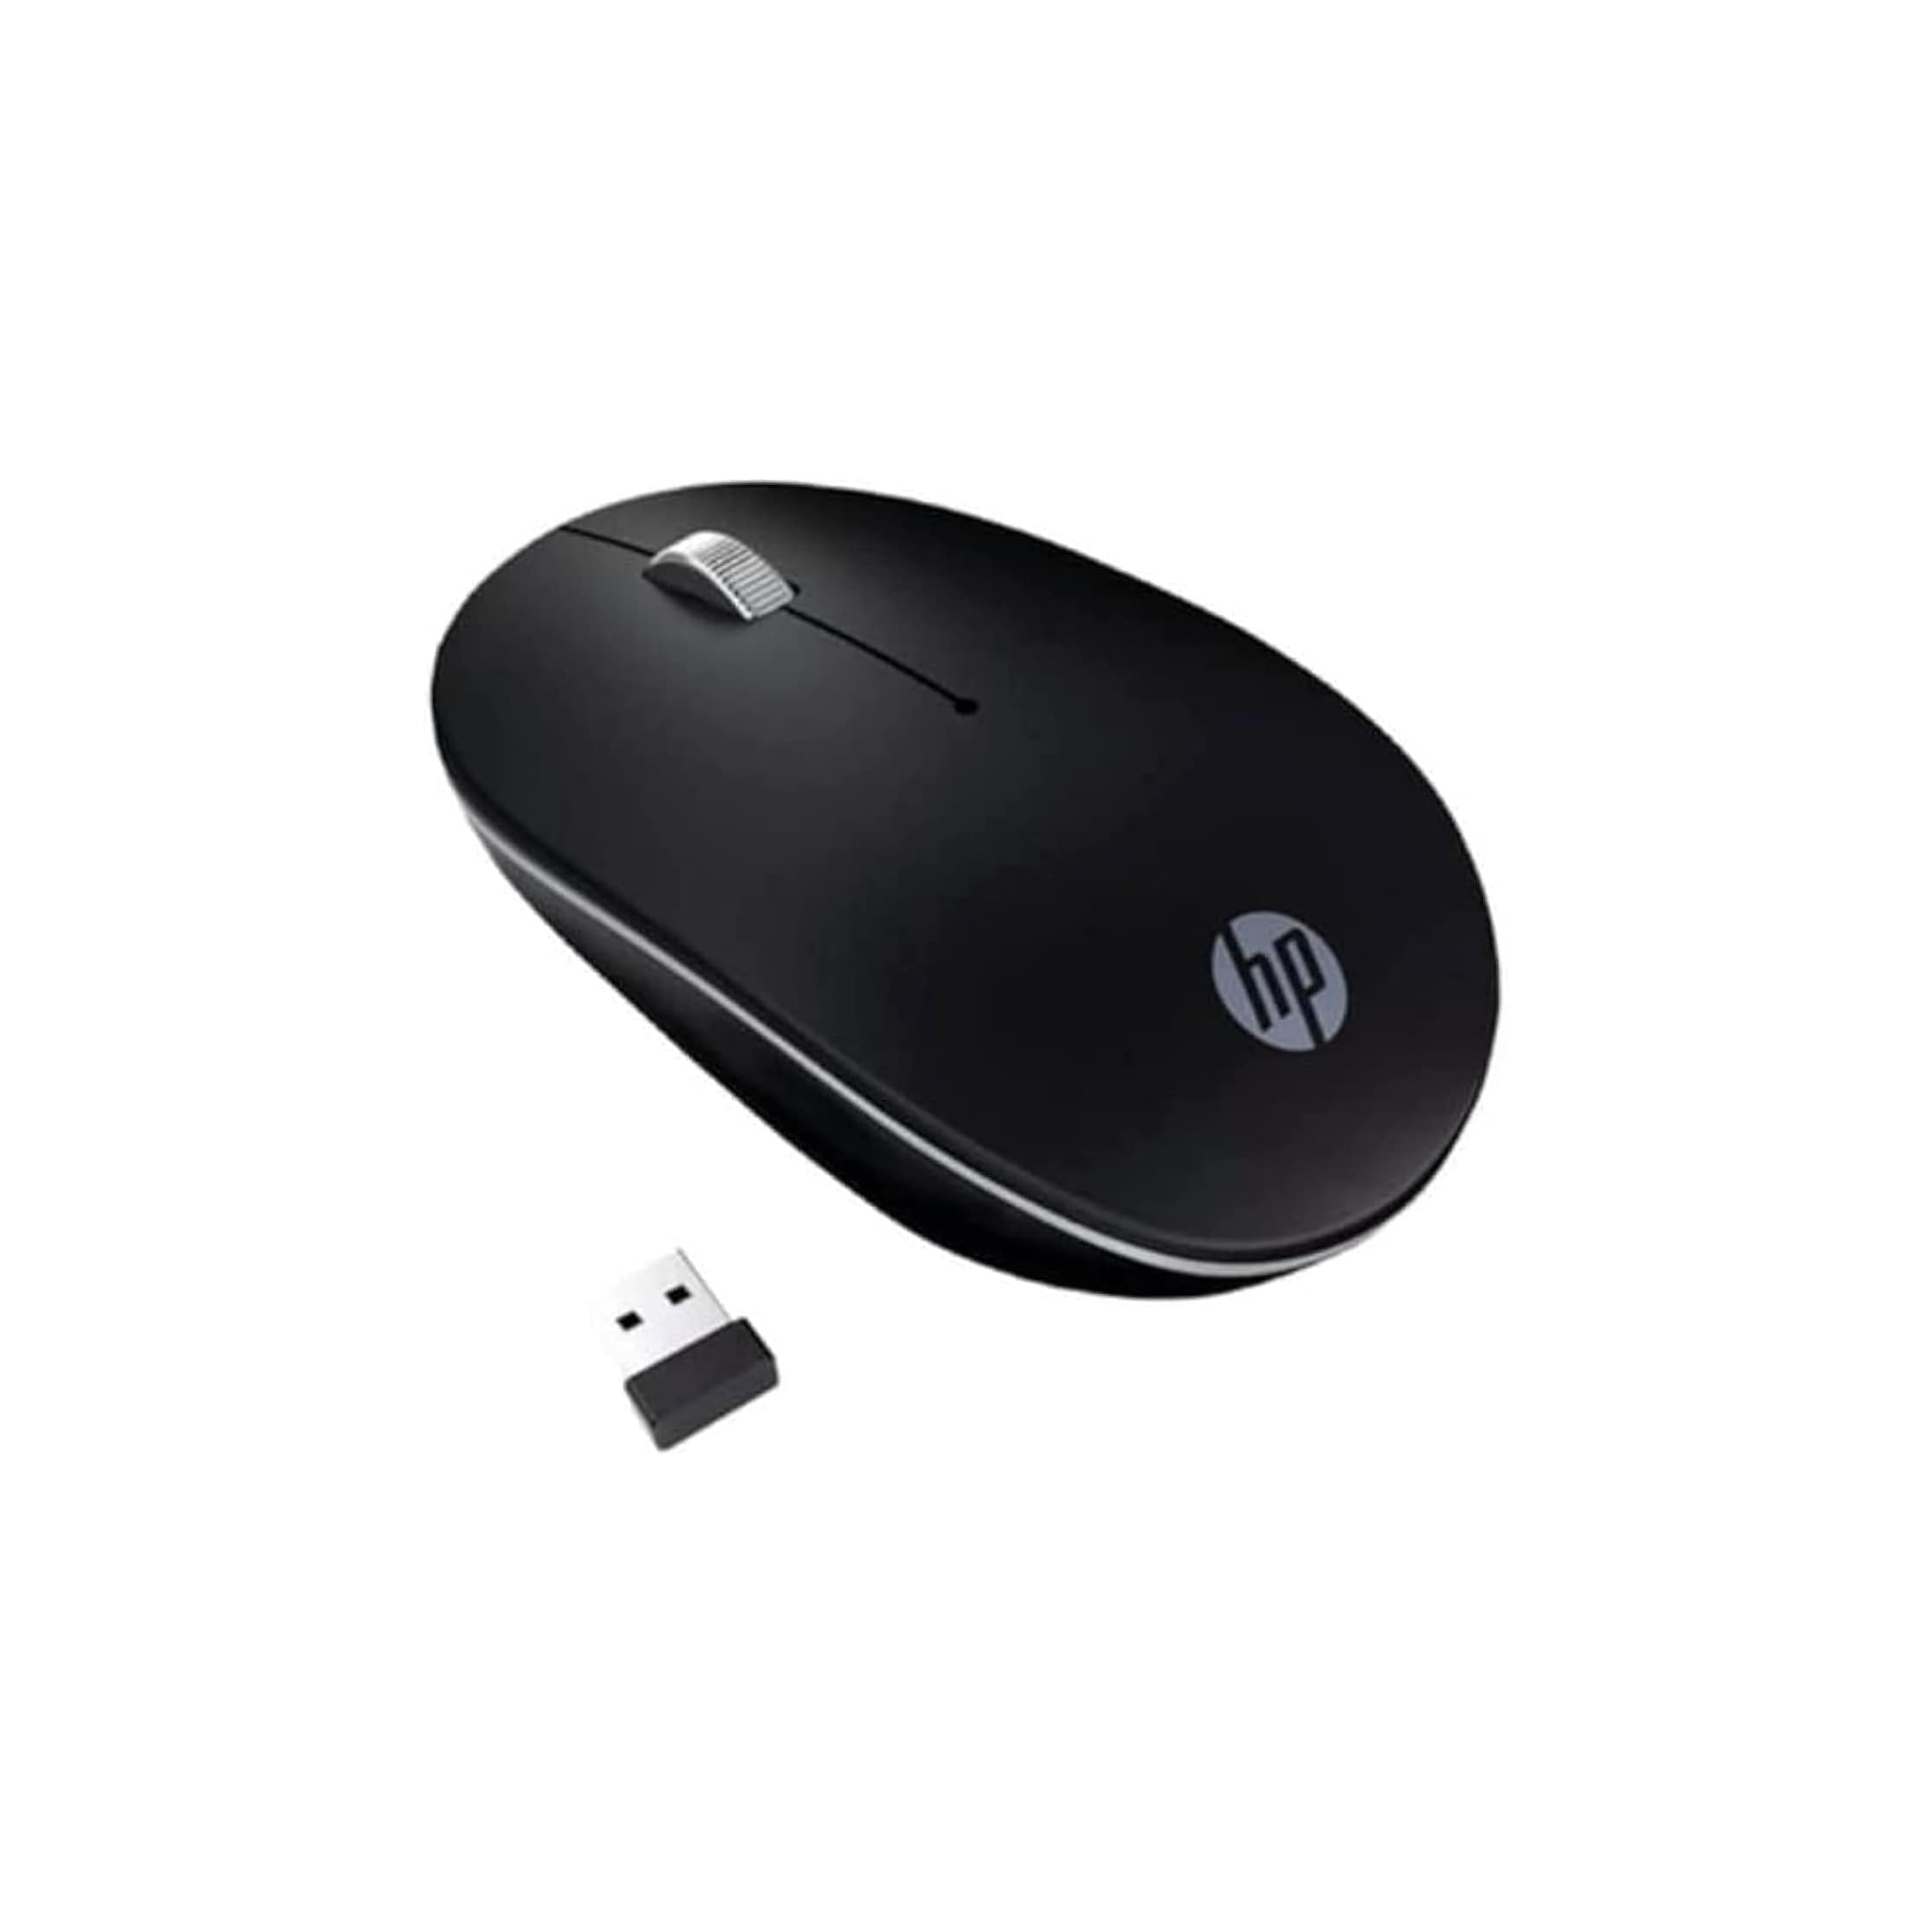 HP S1500 Wireless Mouse – Black   |  Computer Accessories  |  Mouses  |  Wireless Mouses  |